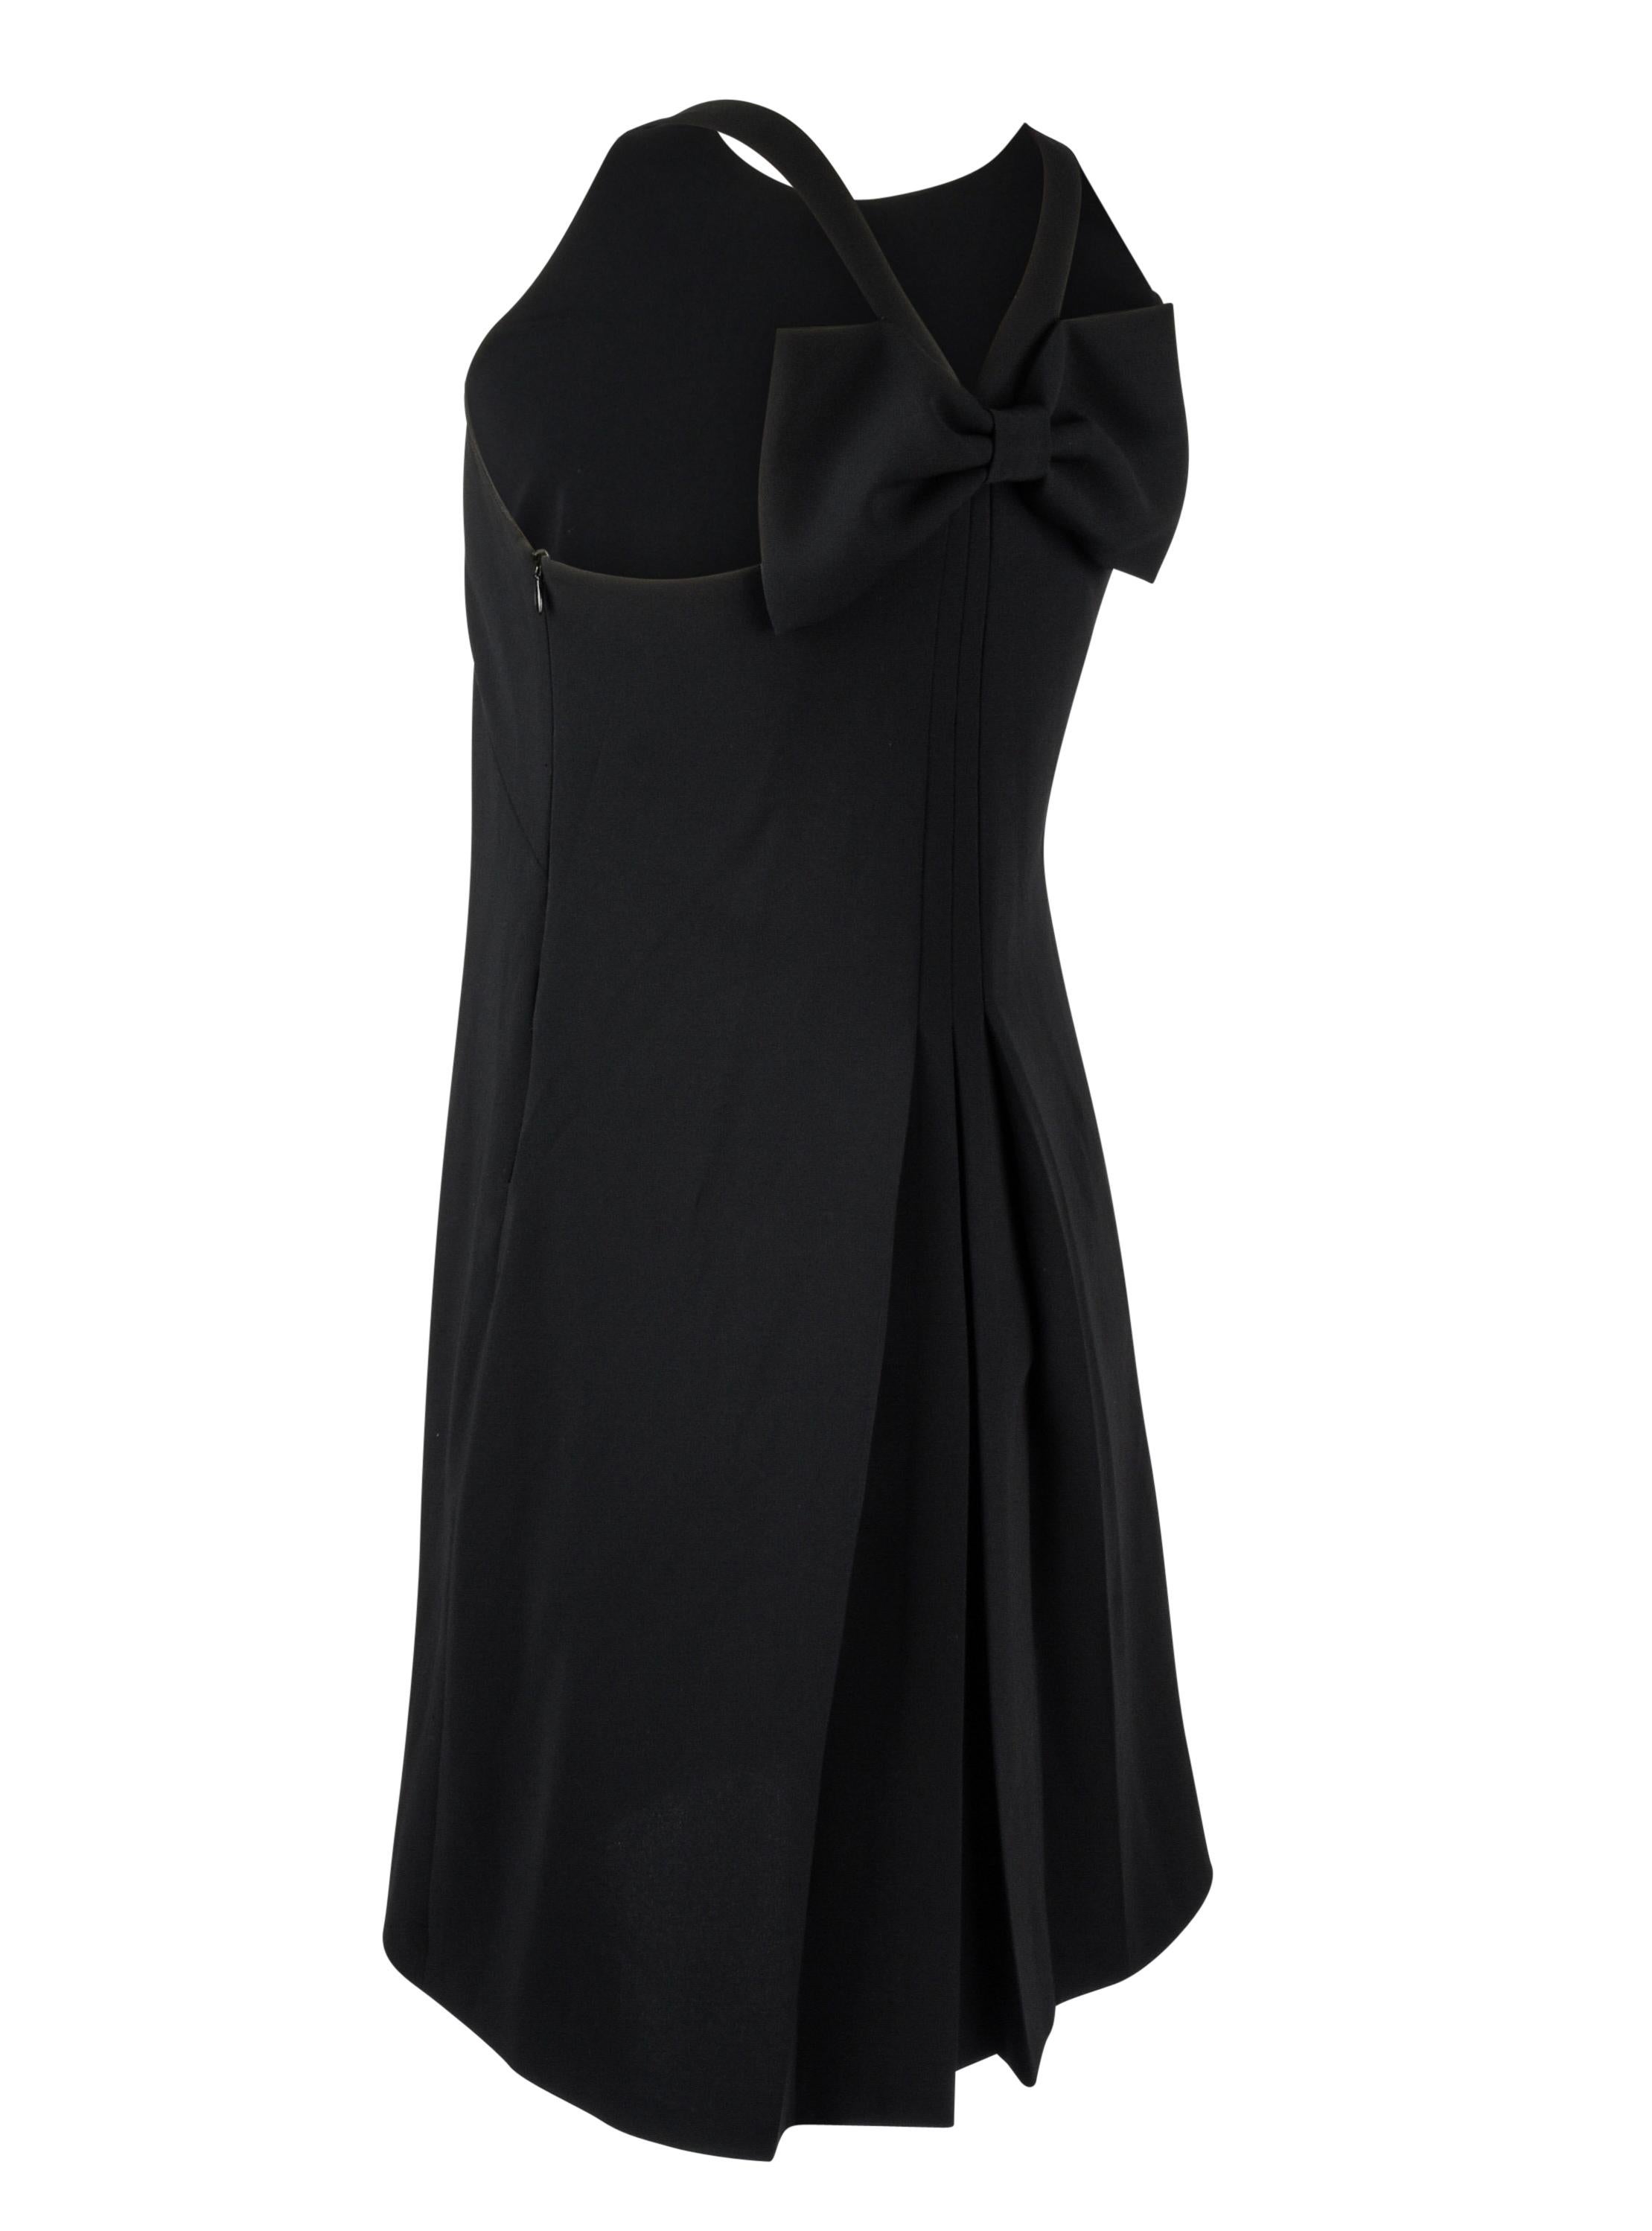 Moschino Dress Black Racer Cut Shoulder Rear Bow and Pleat Detail 42 / 8  In Excellent Condition In Miami, FL